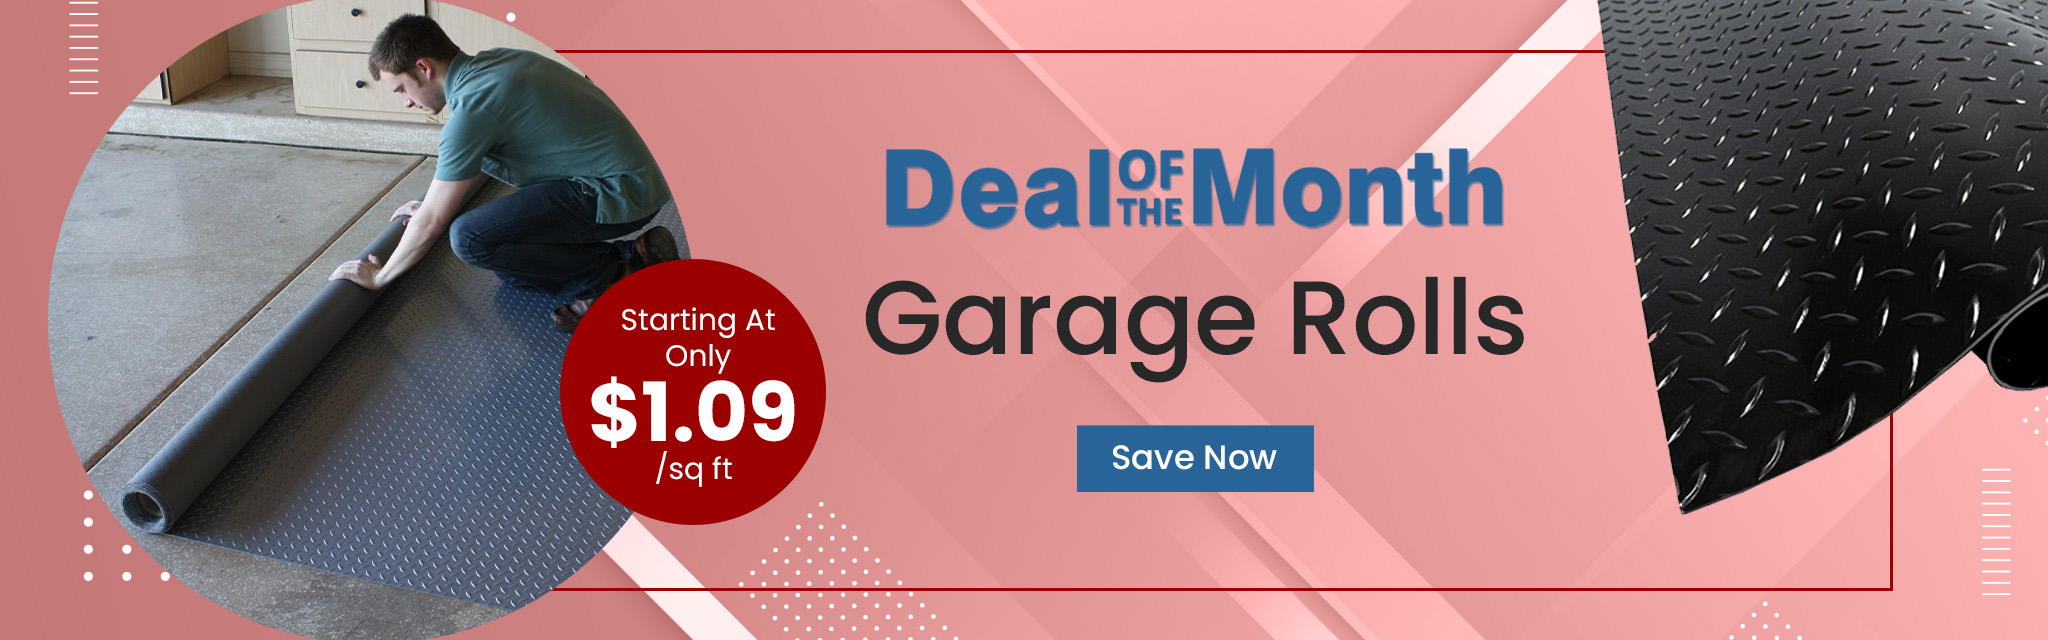 Deal Of The Month. Garage Rolls. Starting At Only $1.09 per square feet. Save Now